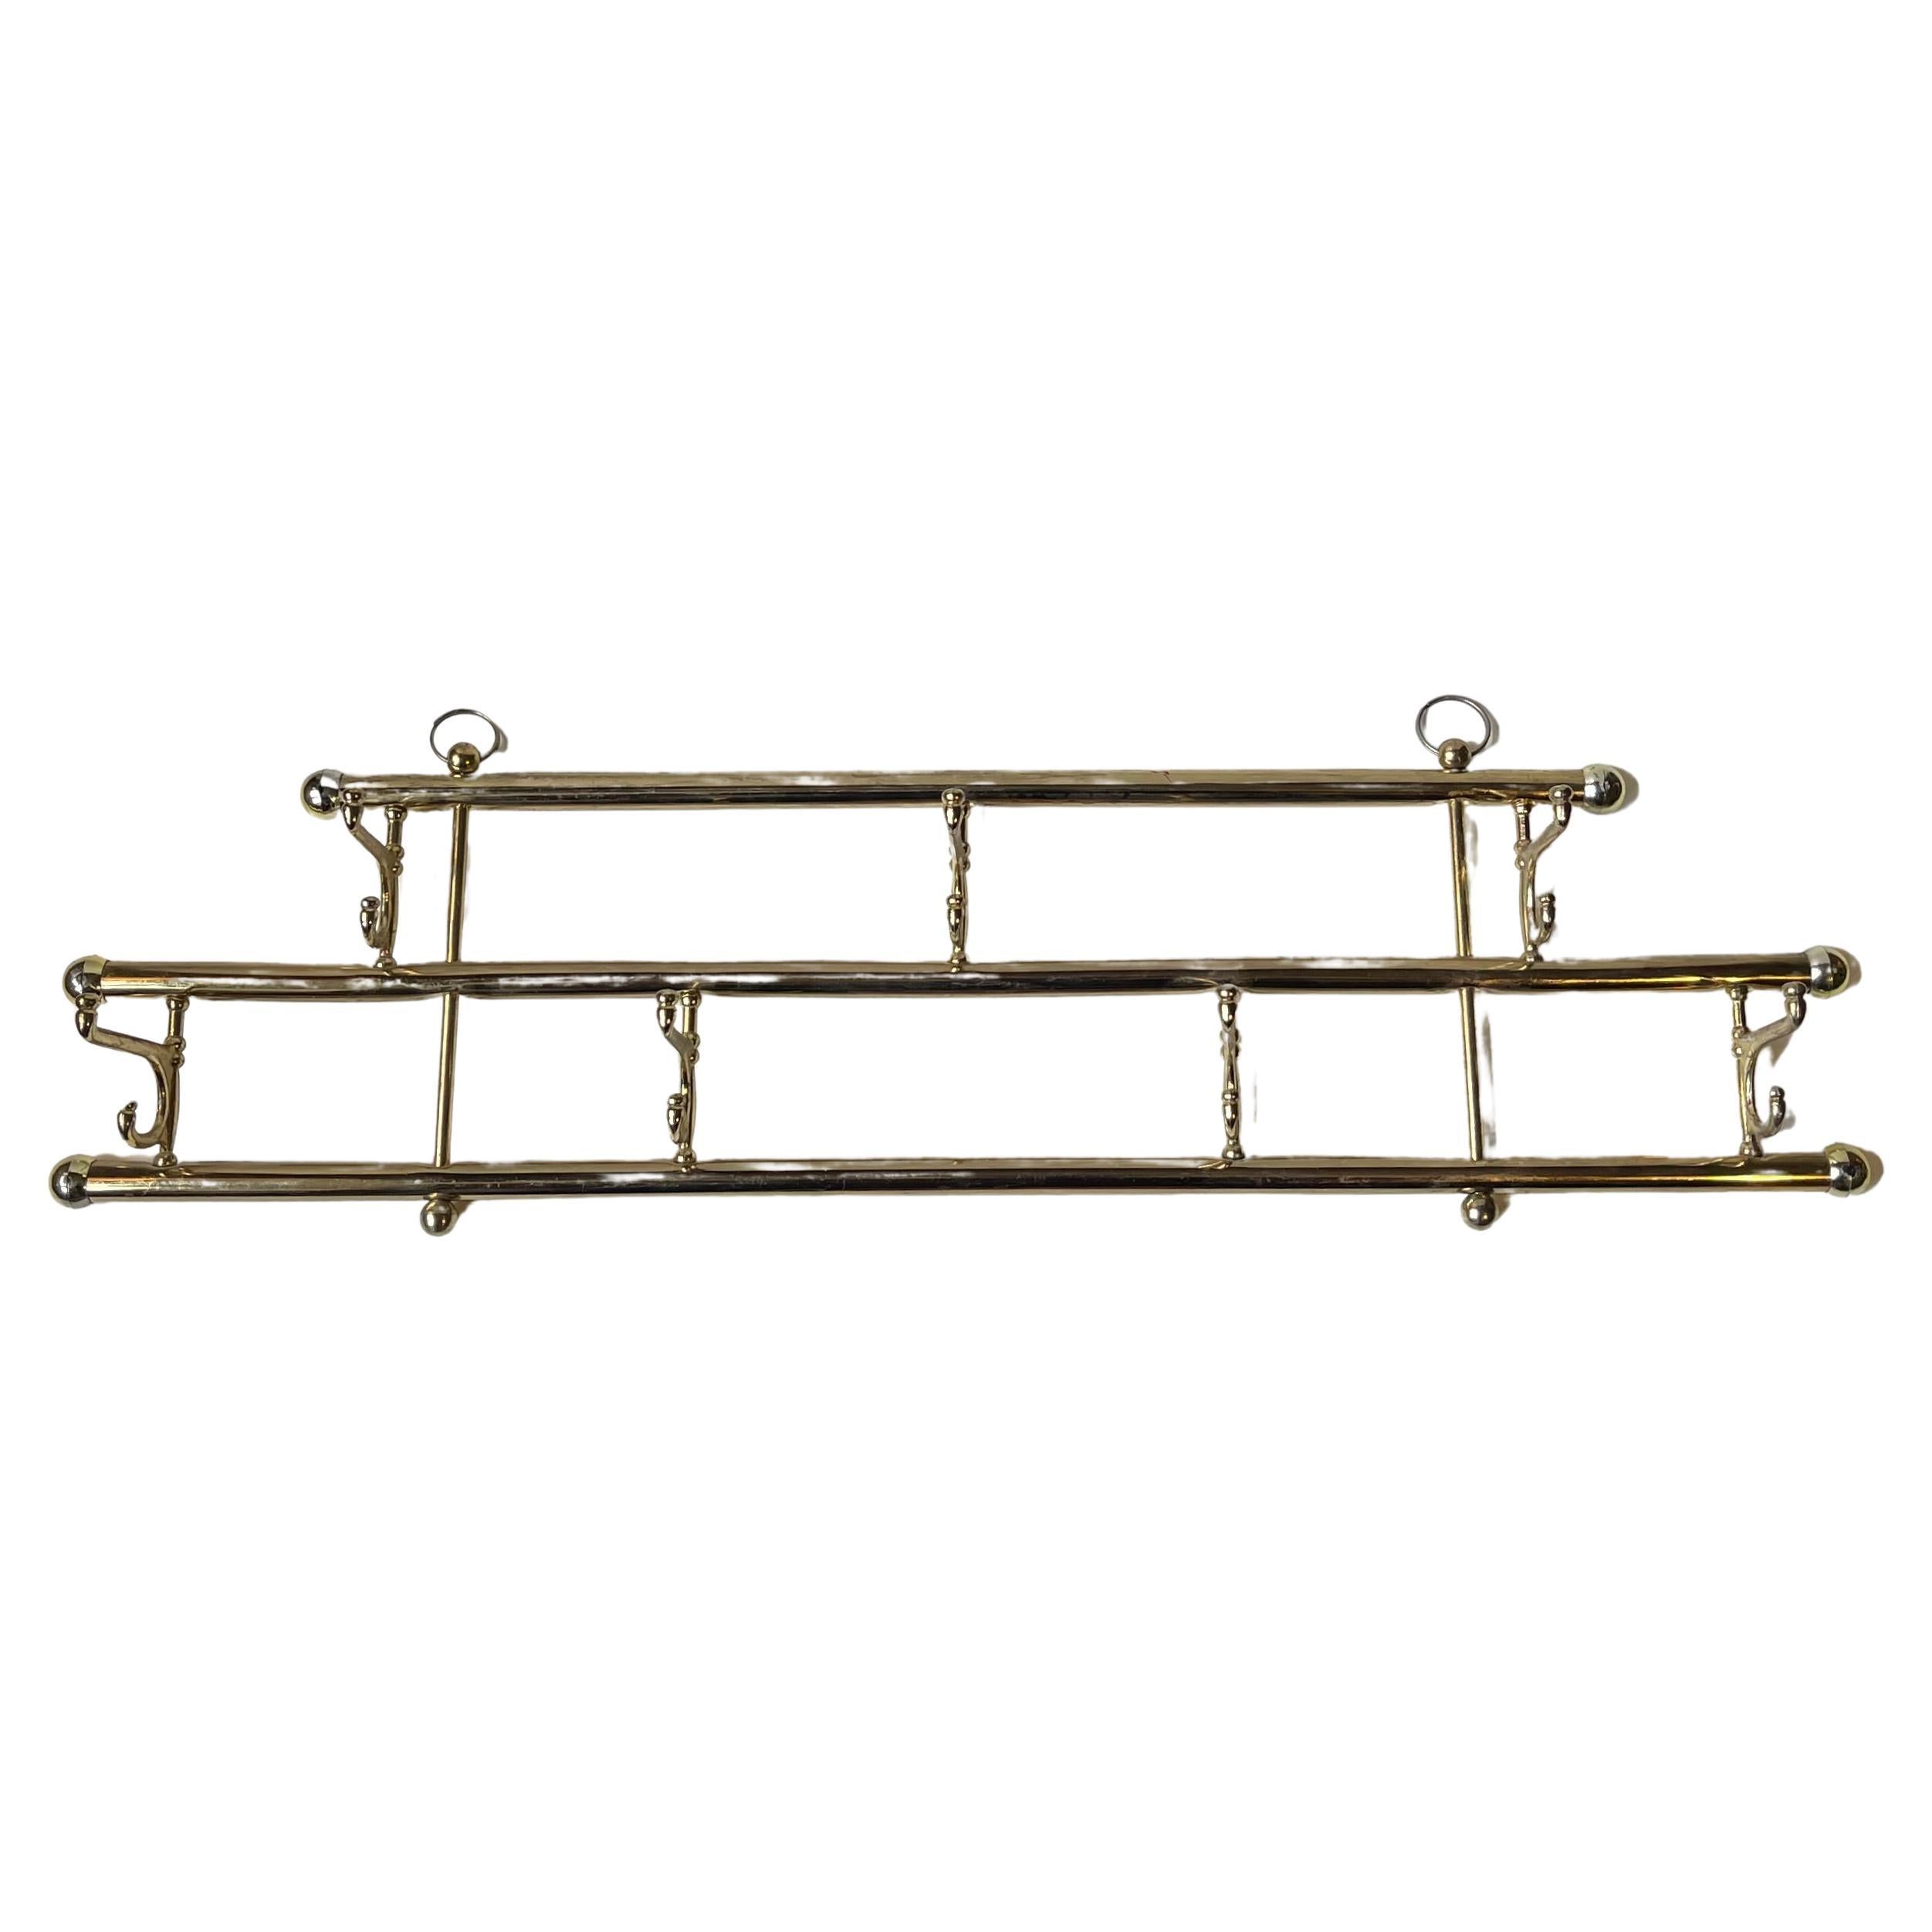 Vintage Towel or Small Coat Rack in Brass and Gold Chrome